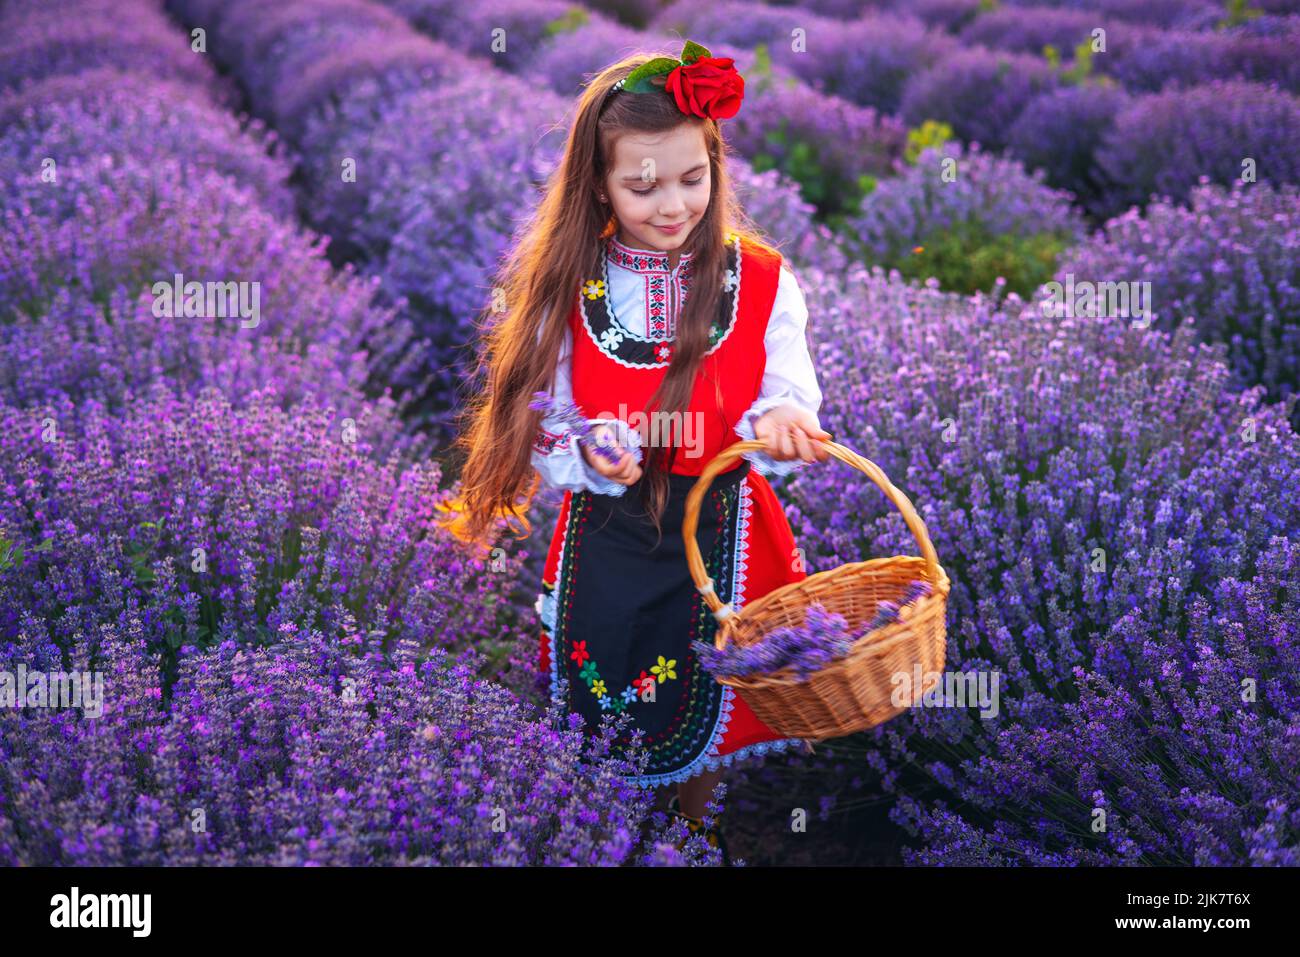 Bulgarian woman in traditional folklore costume picking lavender in basket during sunset. Young girl in a field. Stock Photo